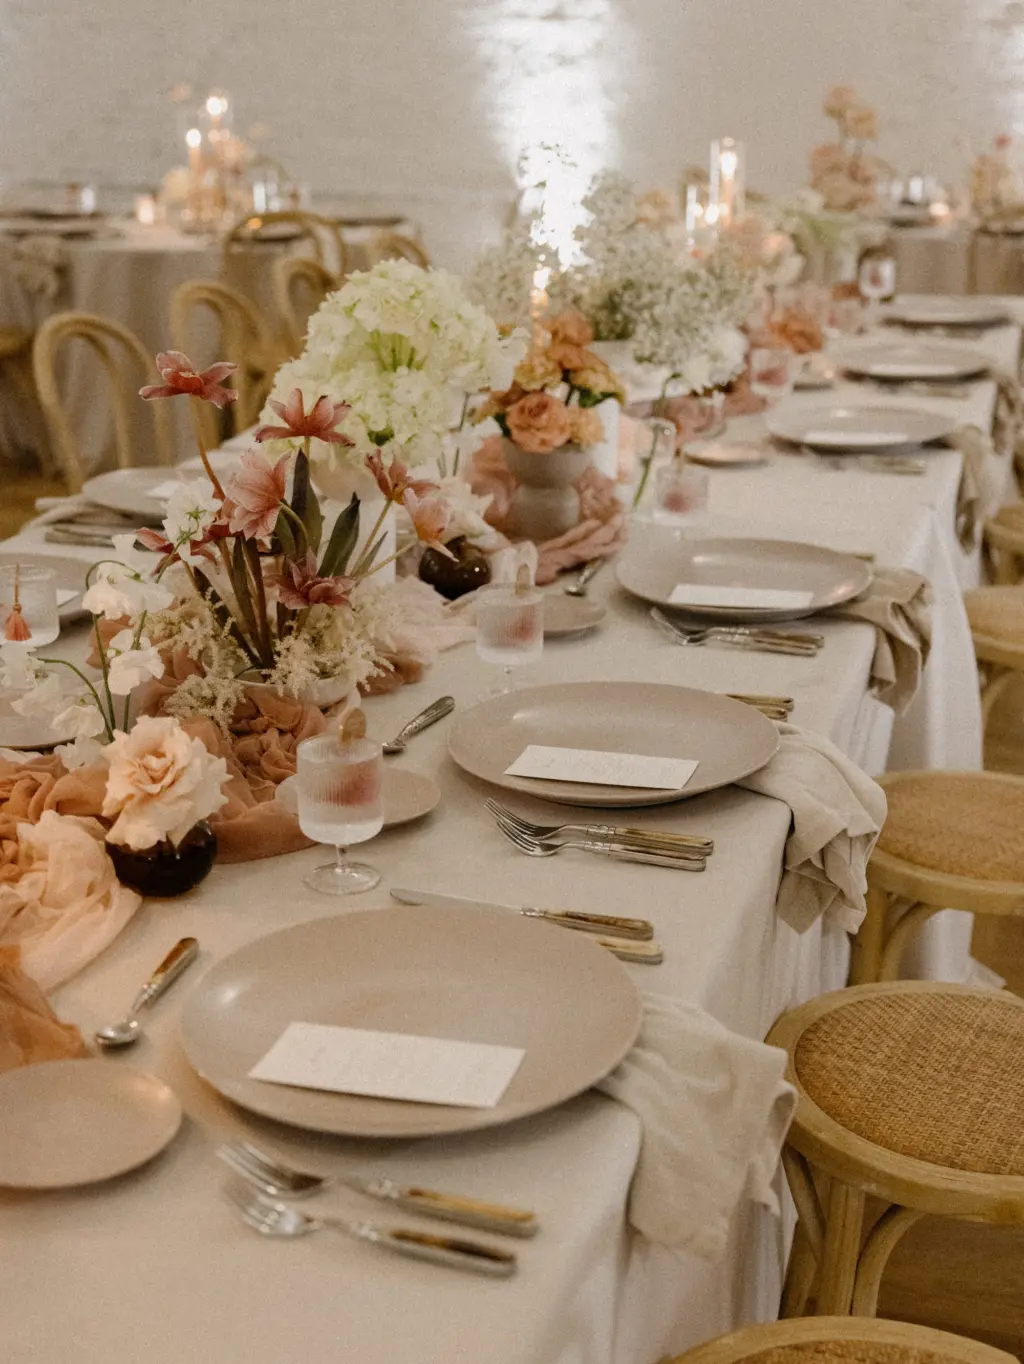 Romantic Boho Beige and Cream Wedding Reception with Pink and White Floral Centerpieces | Neutral Table Setting Ideas